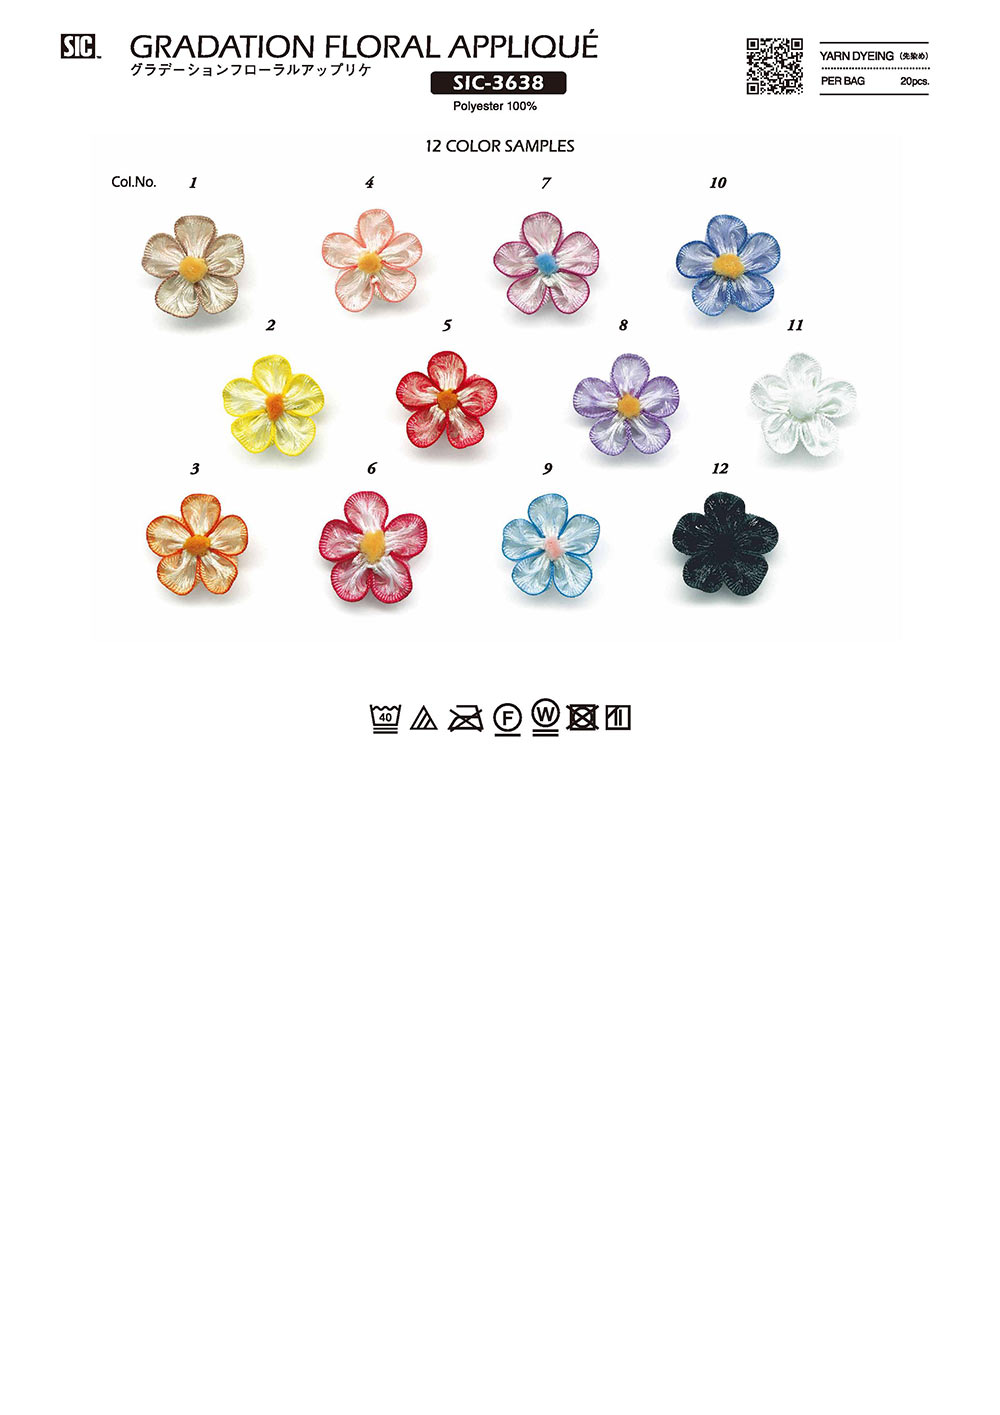 SIC-3638 Gradient Floral Applique[Miscellaneous Goods And Others] SHINDO(SIC)